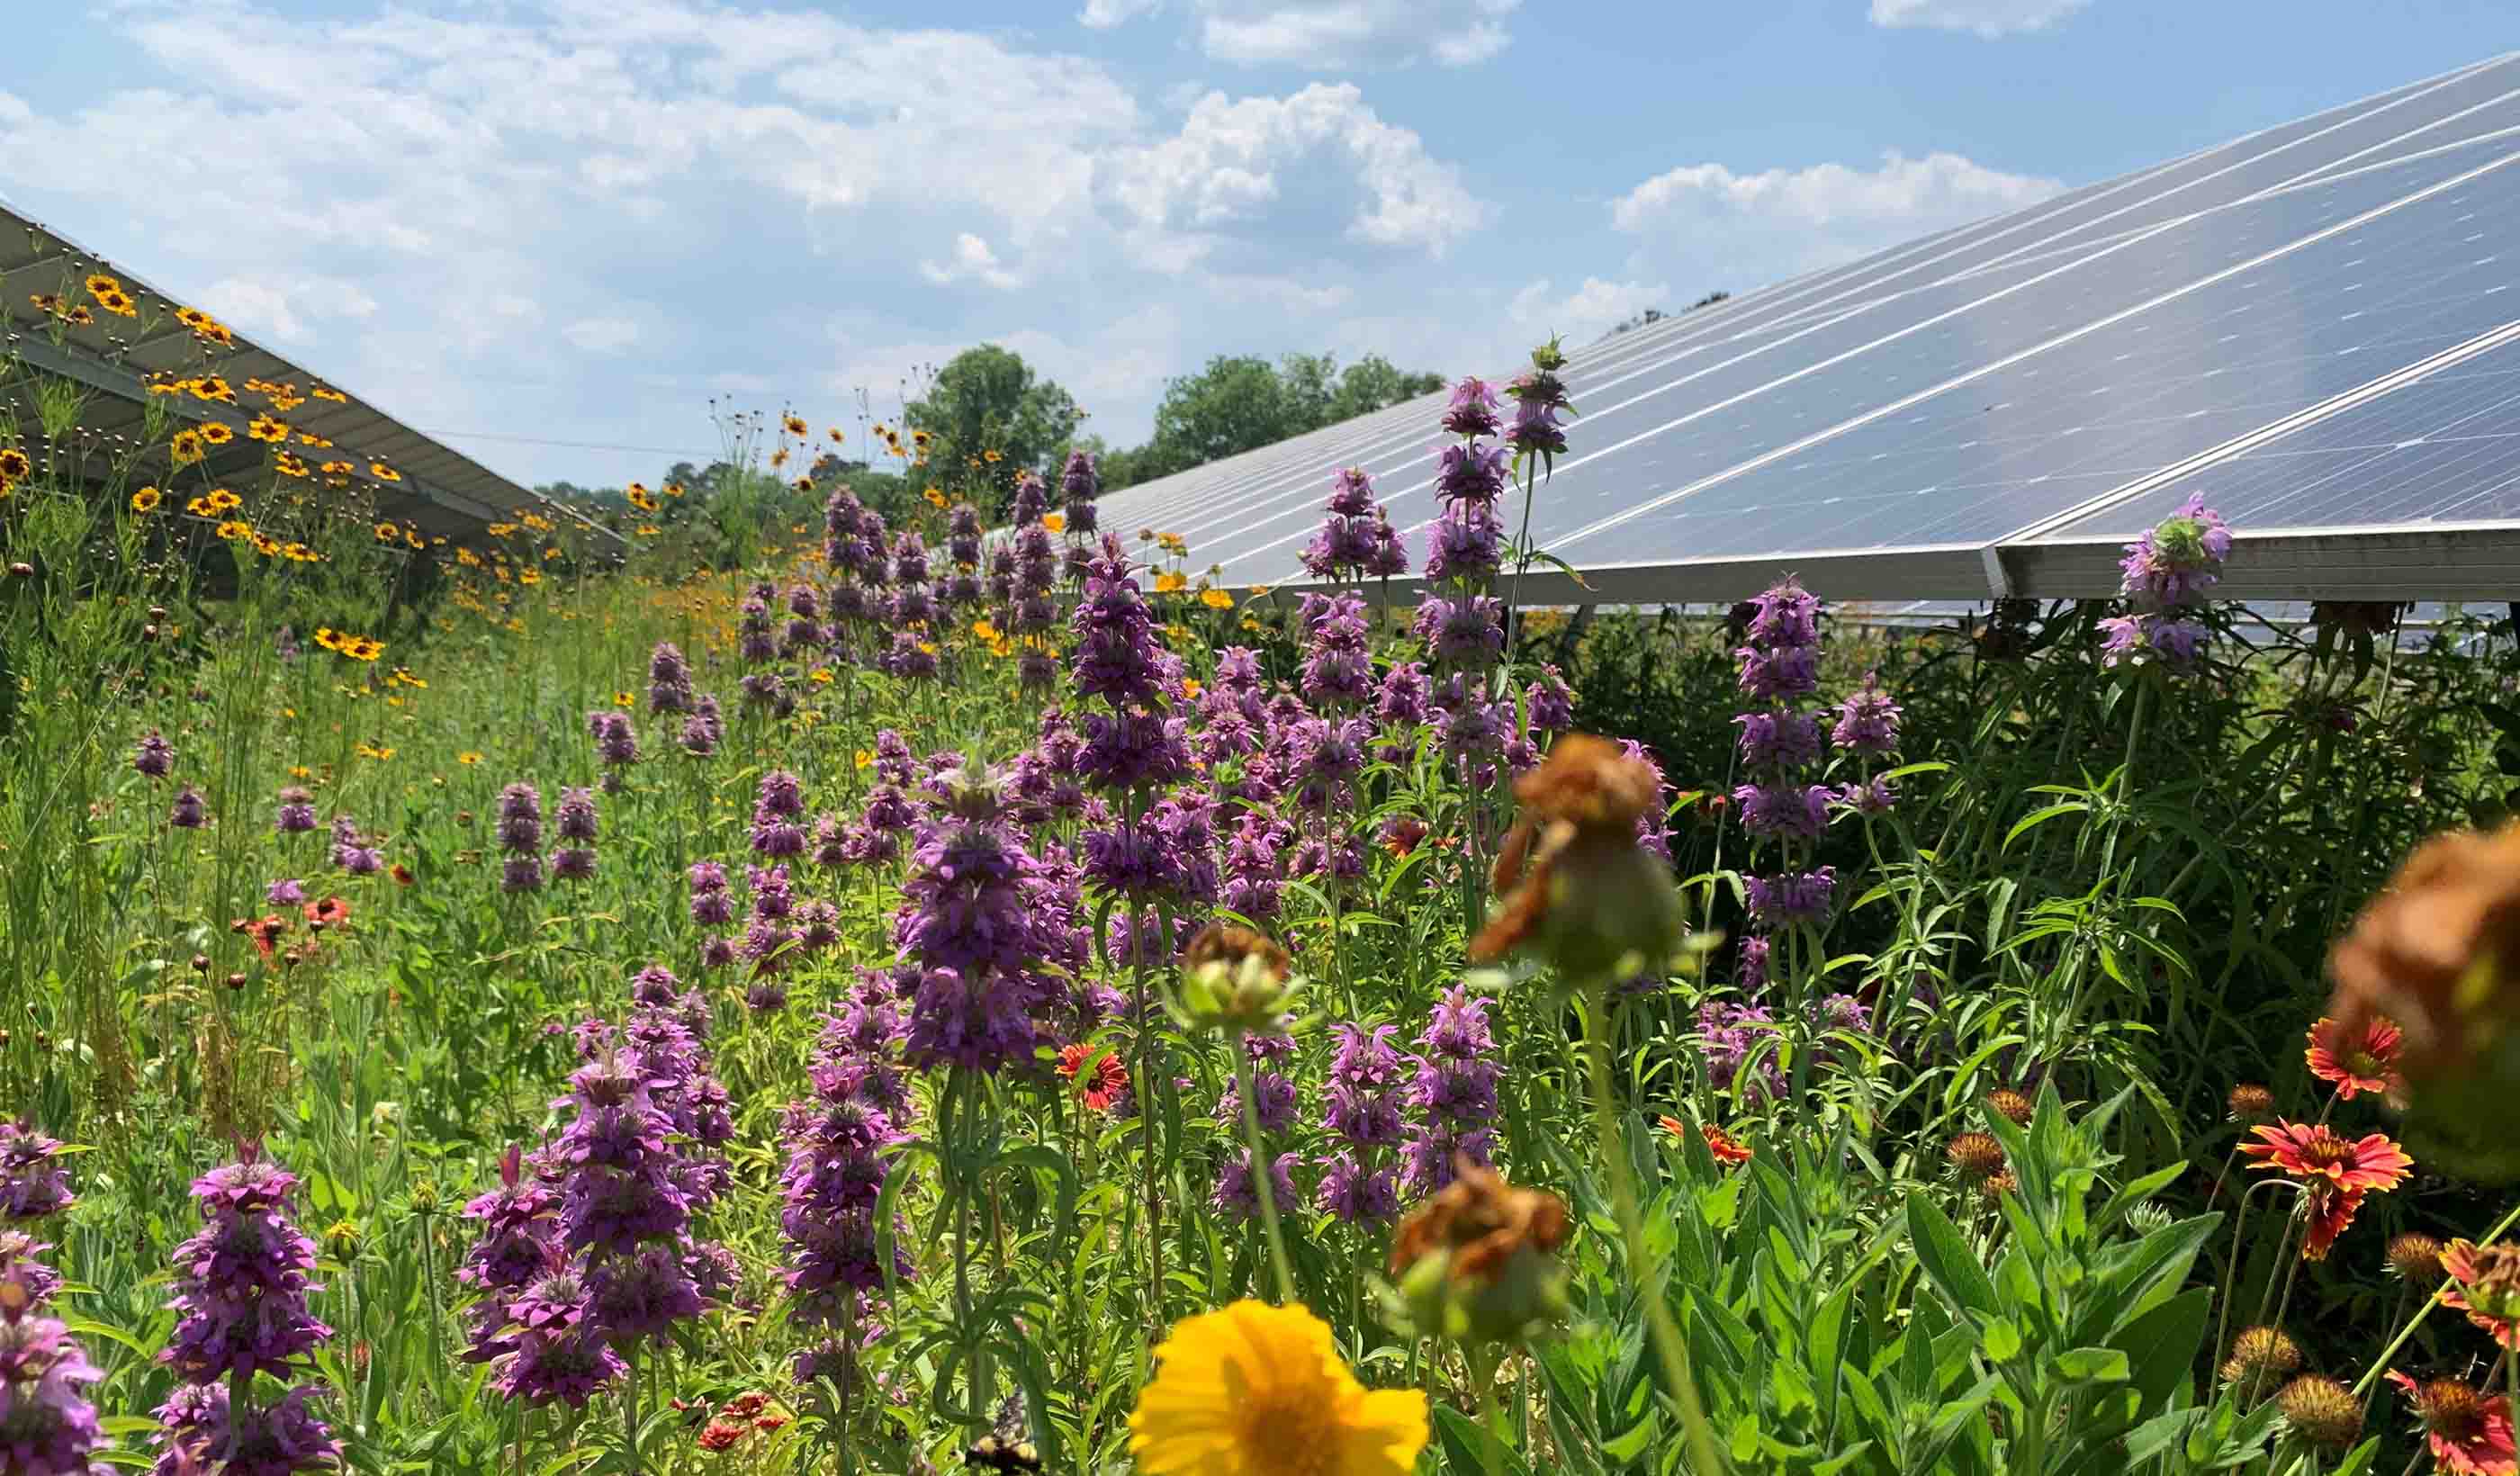 5 steps companies can follow to change unused spaces into eye-popping pollinator habitat